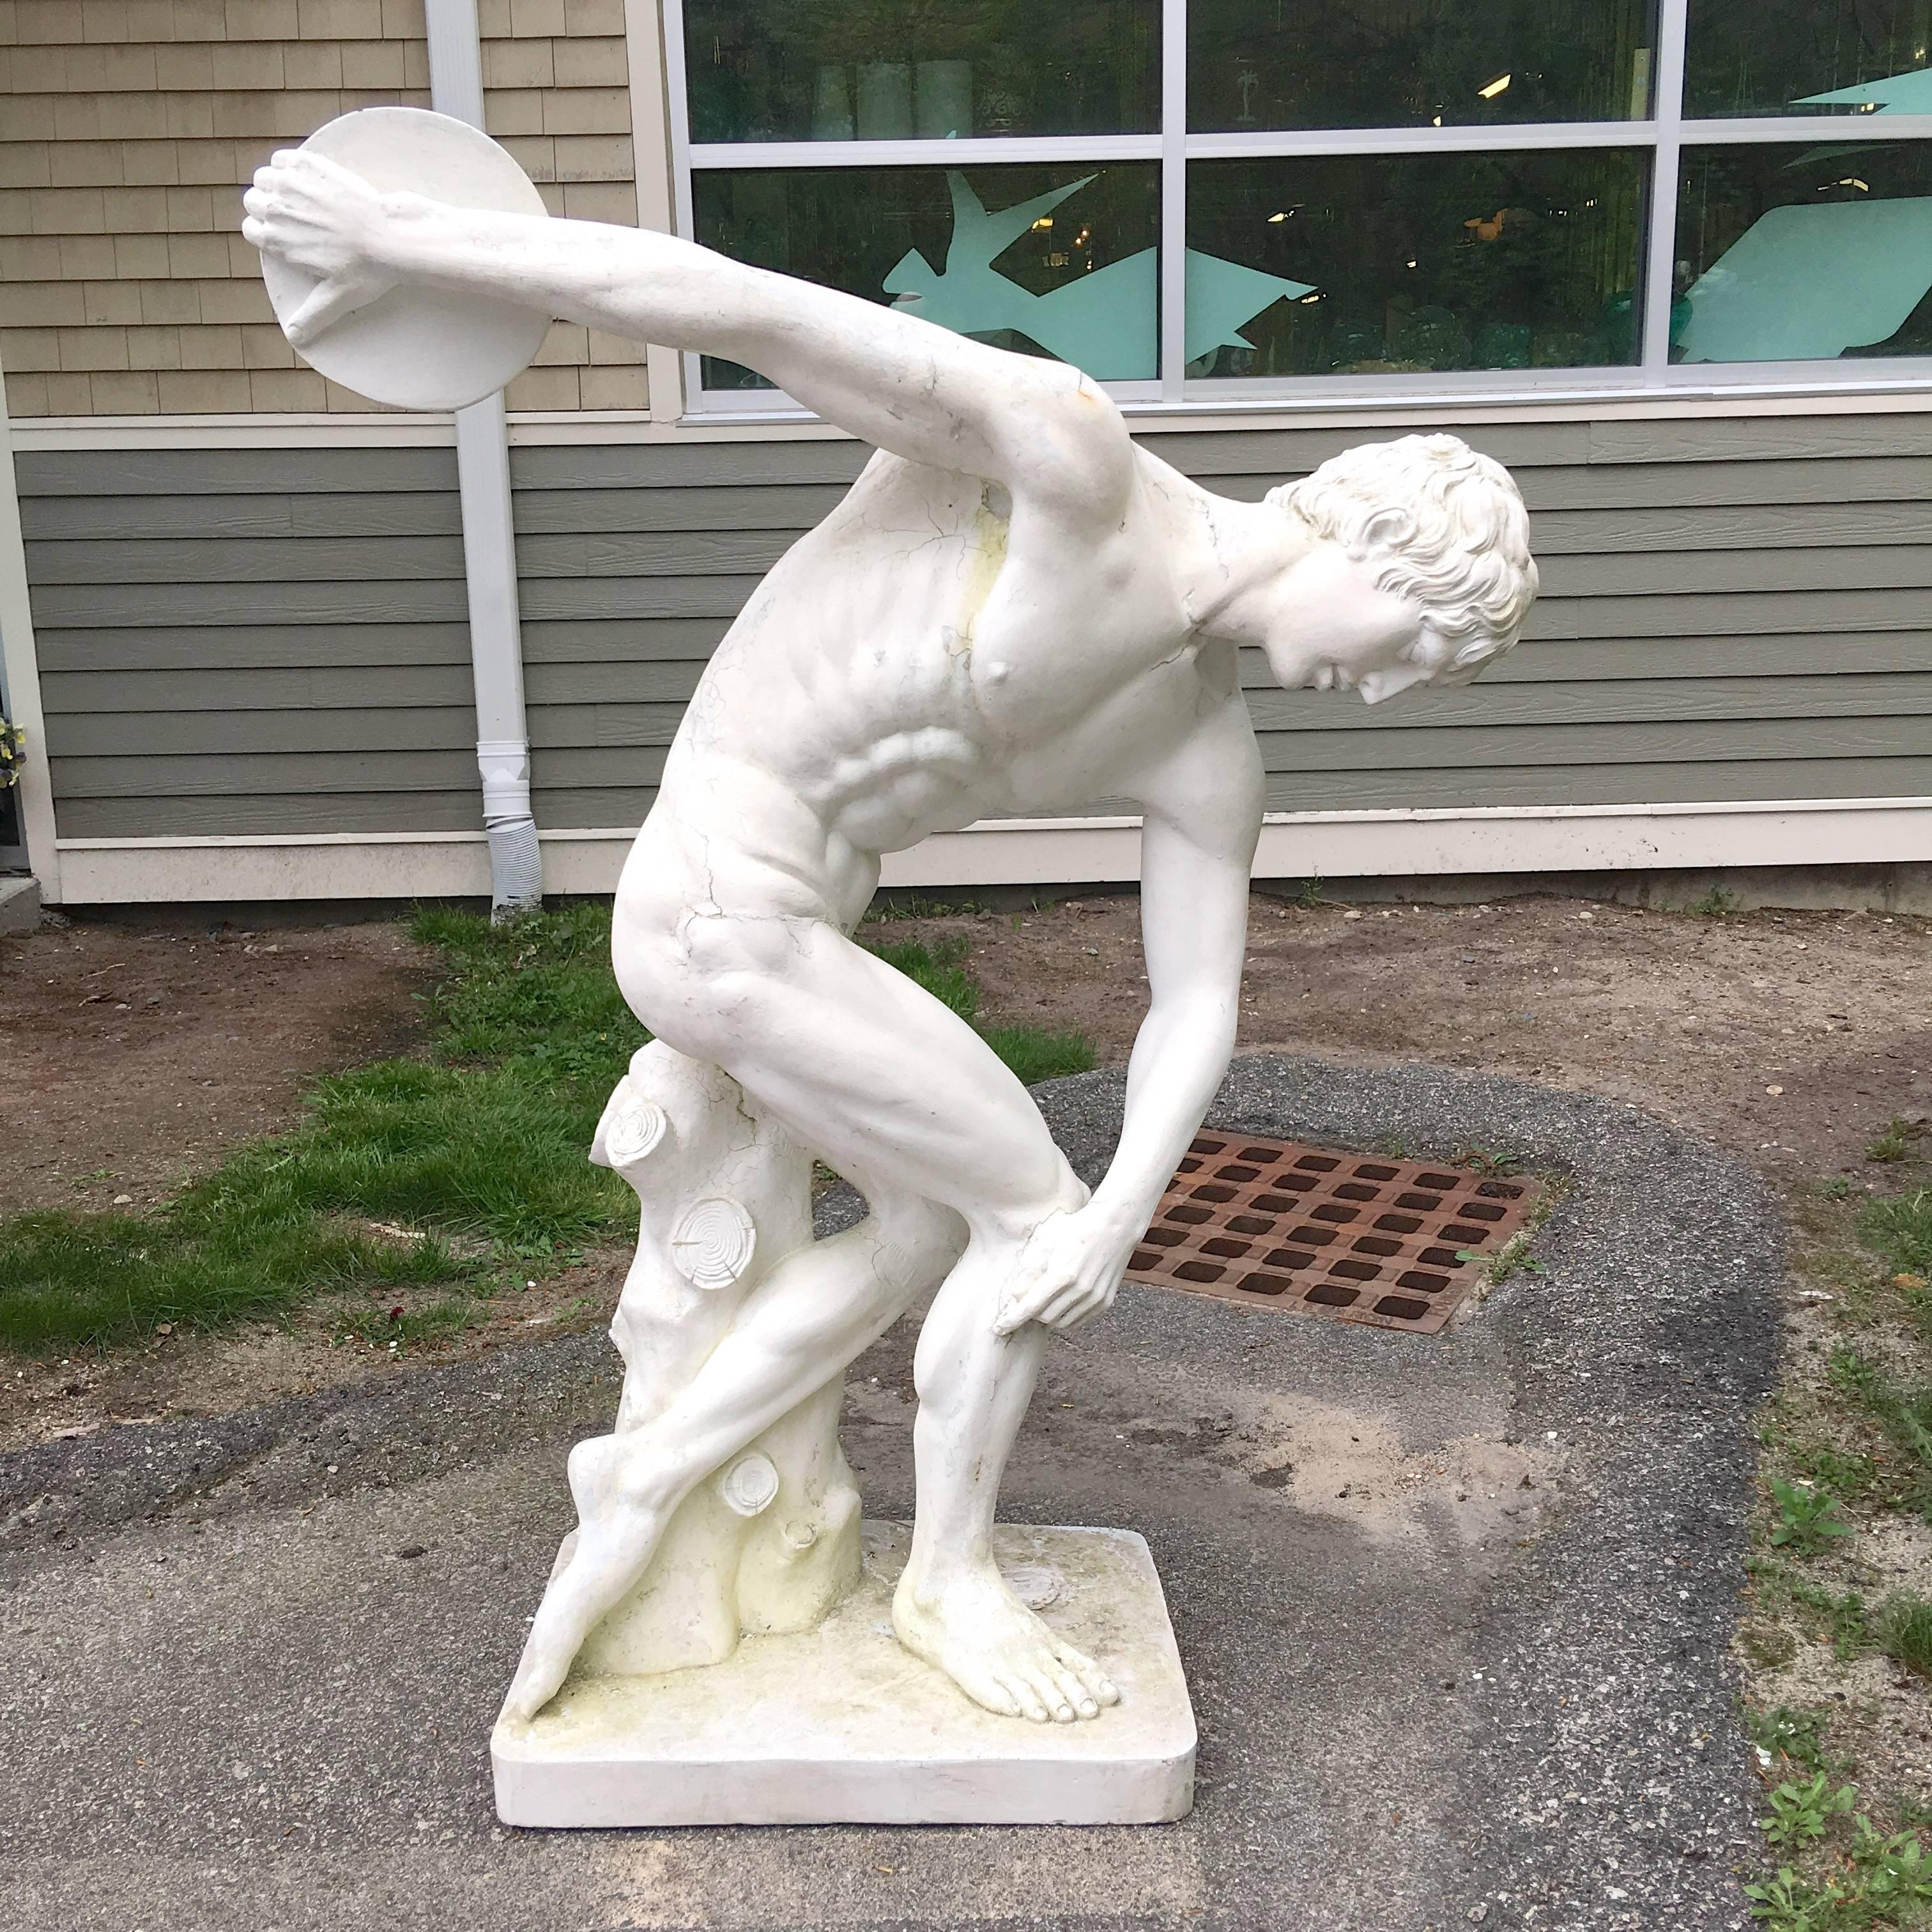 SATURDAY SALE (AUG 2018(

Nearly lifesize replica of the famous ancient Greece sculpture, the Discobolus.

This is a vintage garden statue for outdoor (or indoor) use. Composition is fiberglass and coated with a chalky white plaster resin which